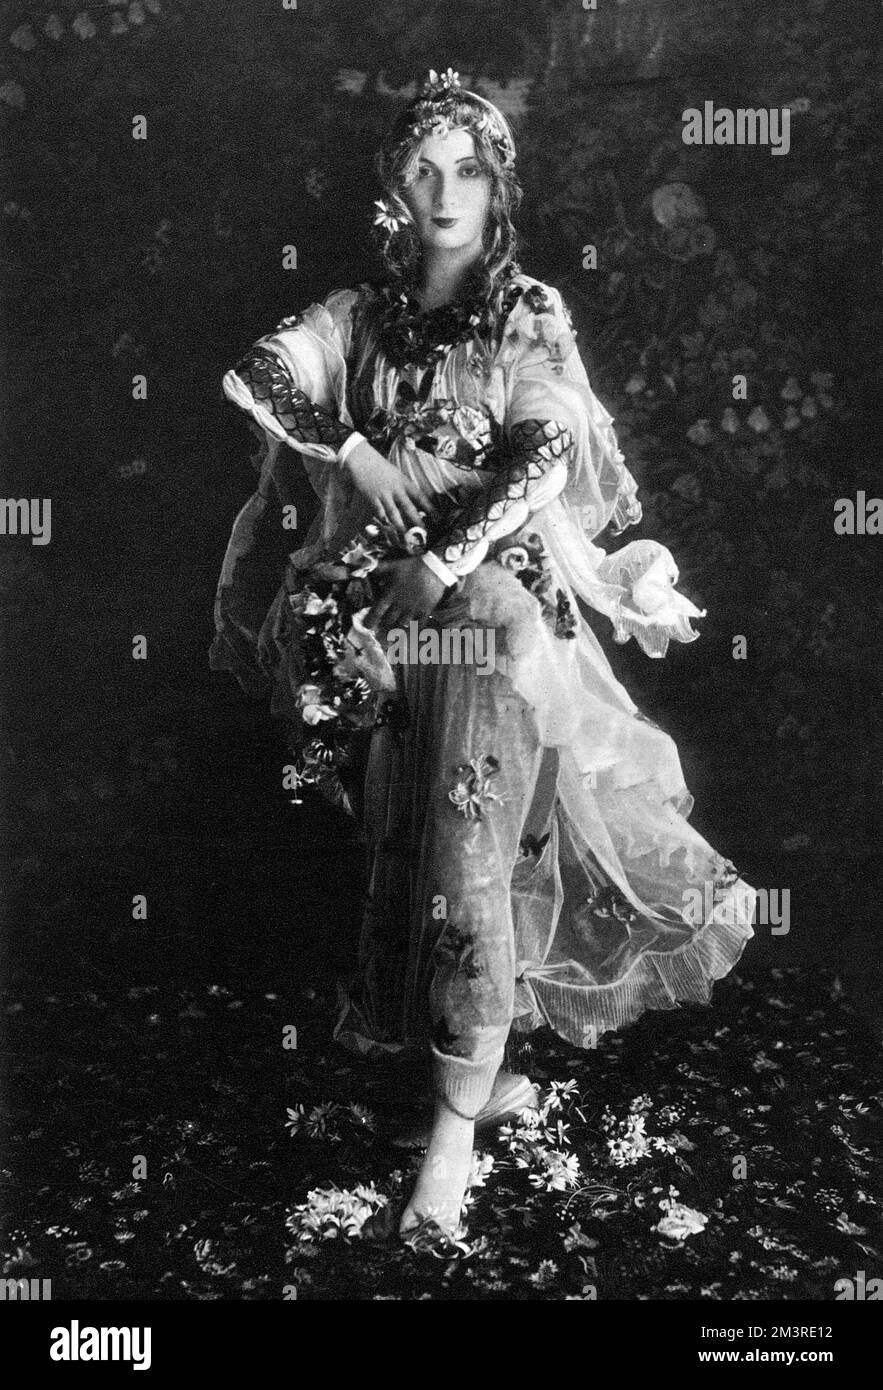 Hazel Lavery, wife of the painter Sir John Lavery, pictured as La Prima Vera by Botticelli at the Picture Ball, held at the Albert Hall in aid of the Invalid Kitchens of London The ball paid homage to all styles of painting from the past from Egyptian and Etruscan up to the Modernists with a succession of highly accurate representations made by members of high society.      Date: 1913 Stock Photo